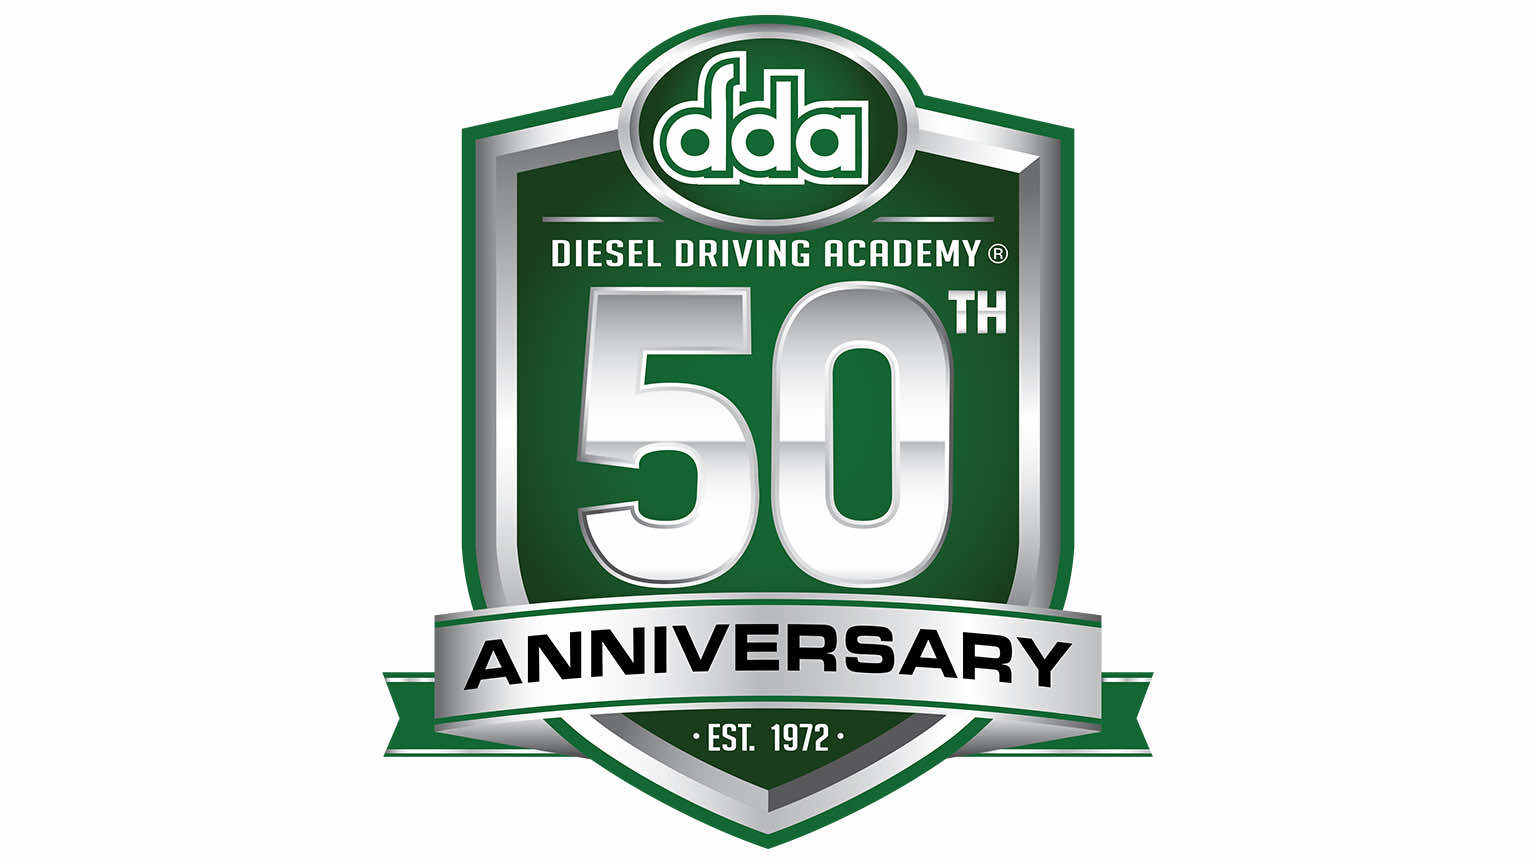 Image of Diesel Driving Academy's logo, which illustrates their brand essence